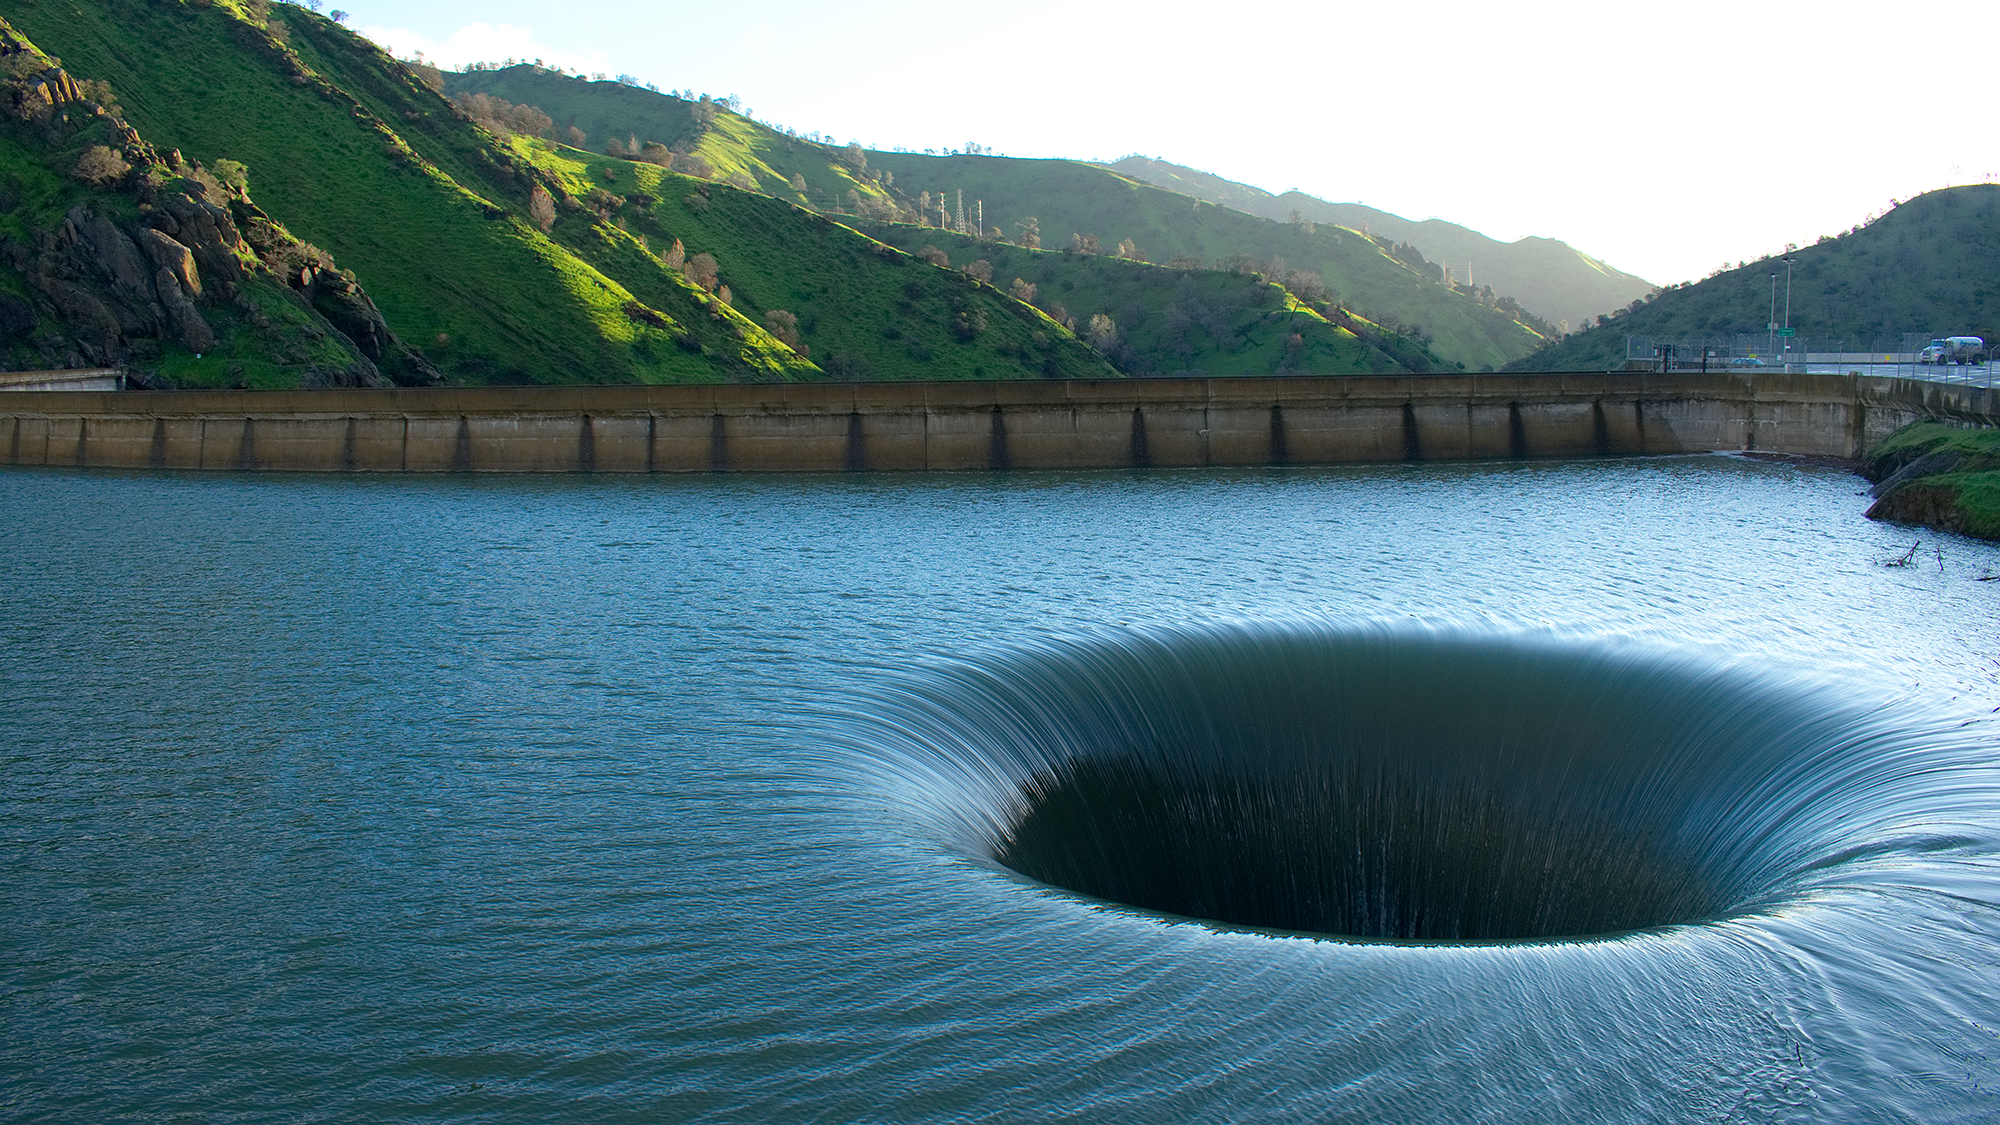 Emily Schwalen and the Enigma of Lake Berryessa's Glory Hole